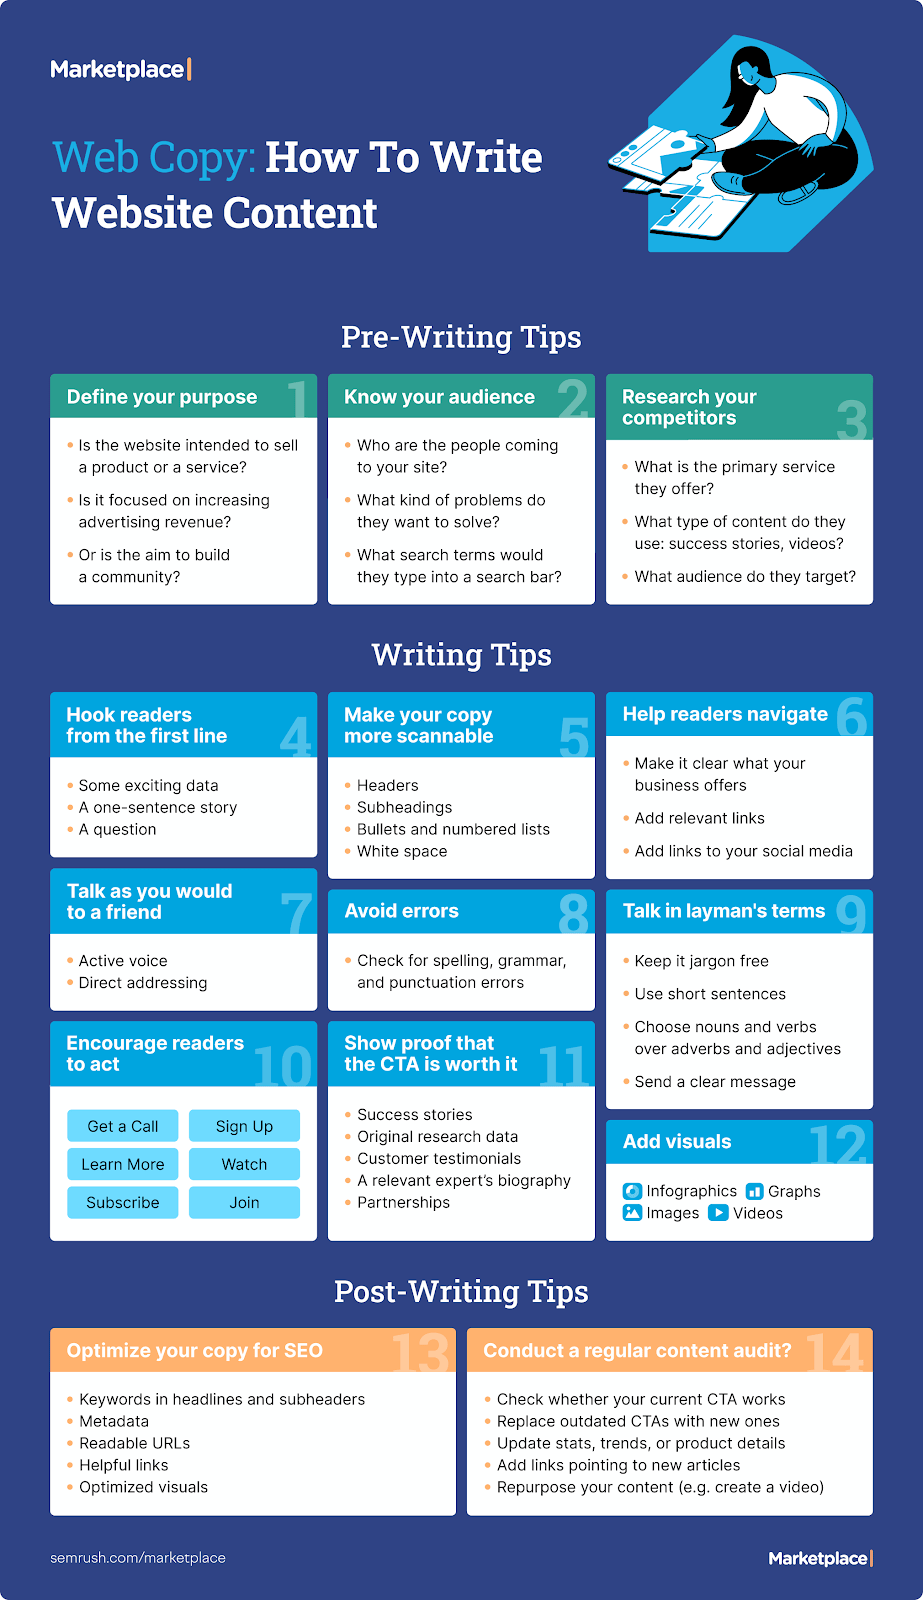 Marketplace's infographic on "web copy: how to write website content"